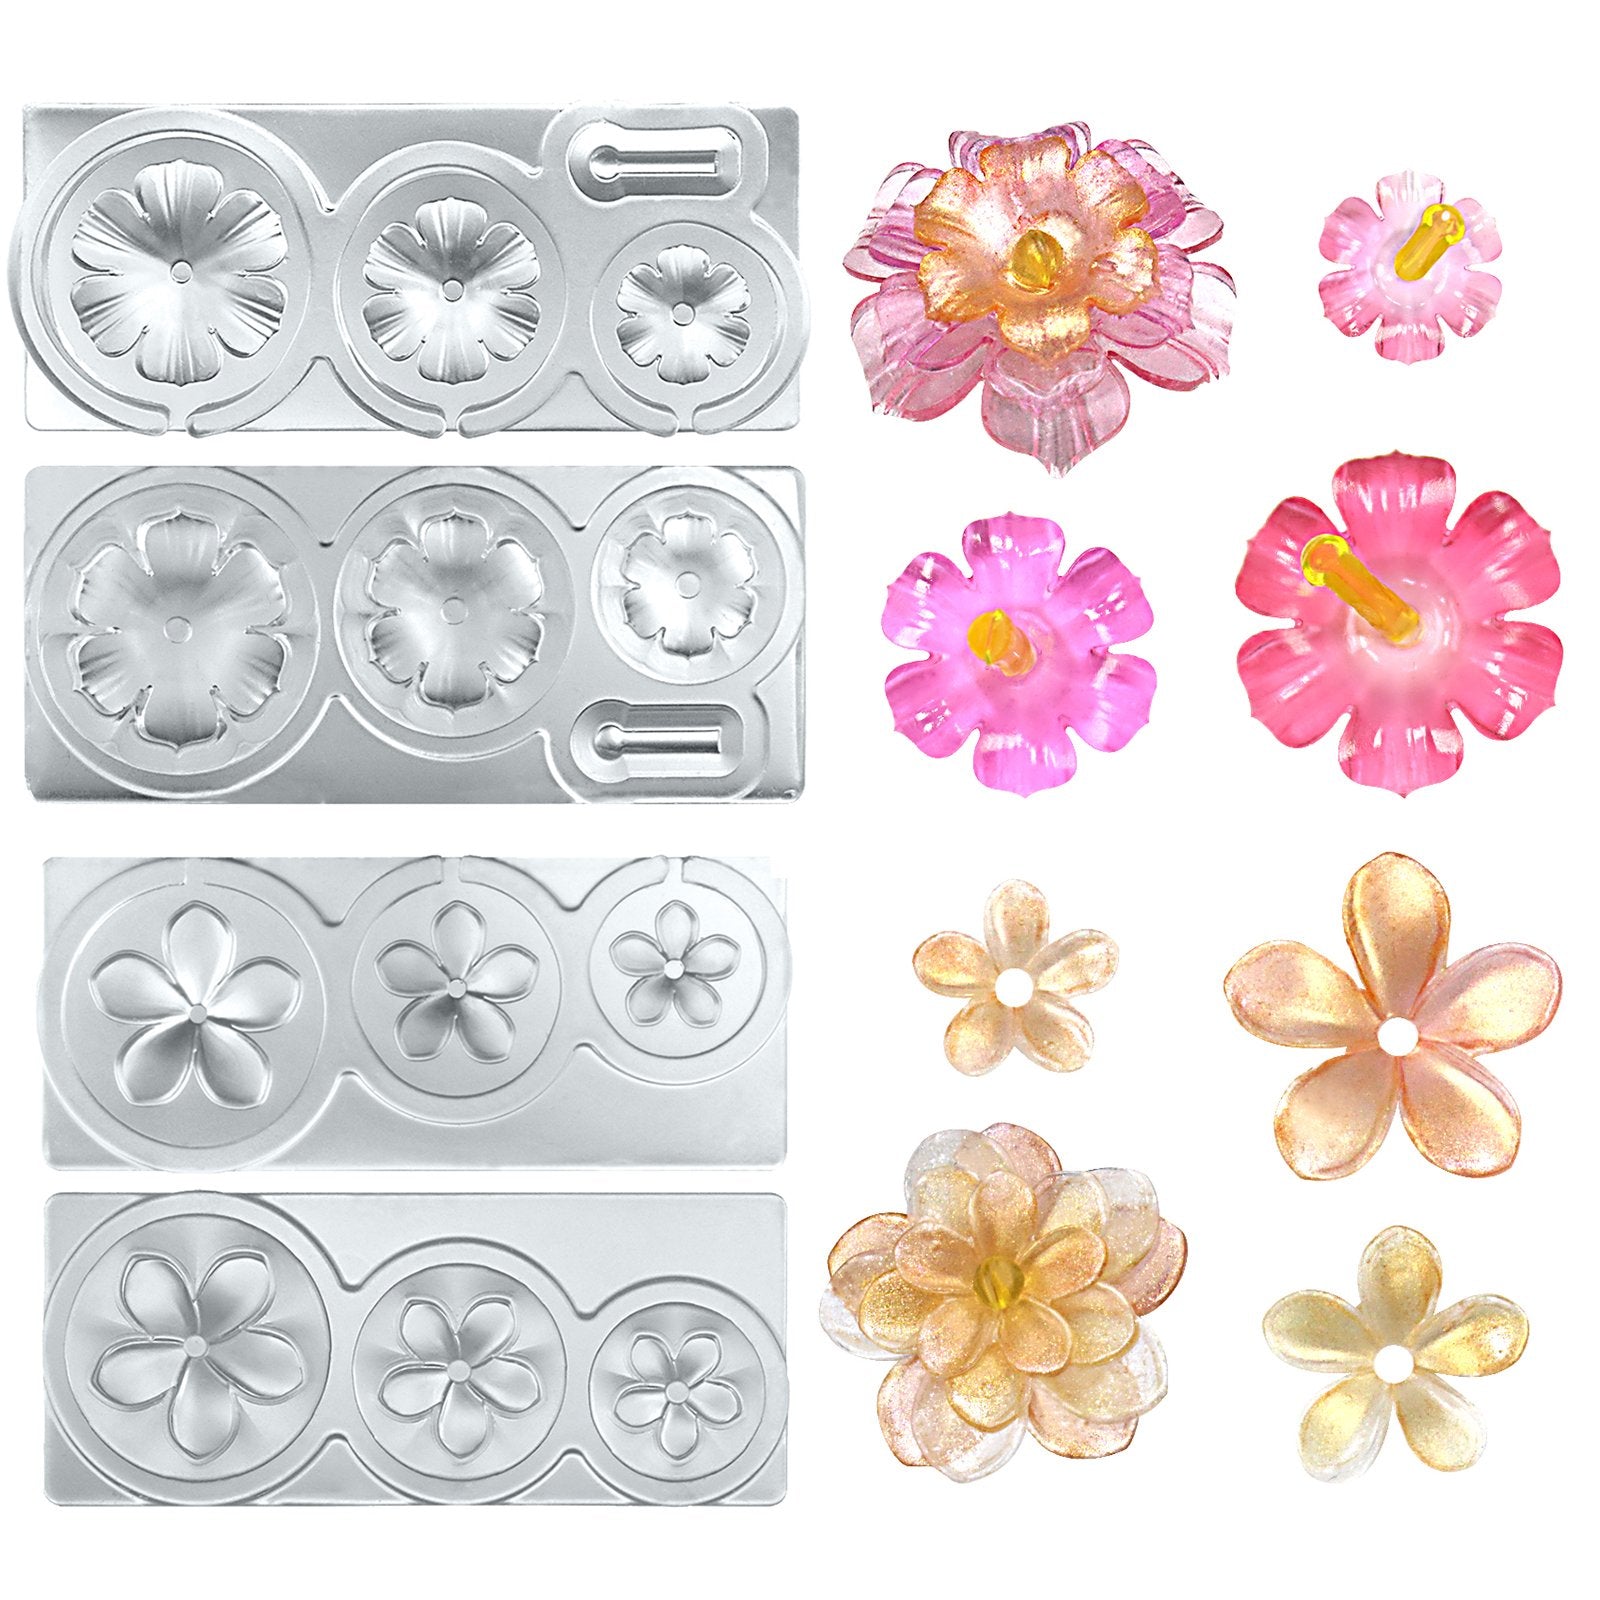 Silicone Flower Mold, Resin Flower Mold, Tiny Flowers, DIY